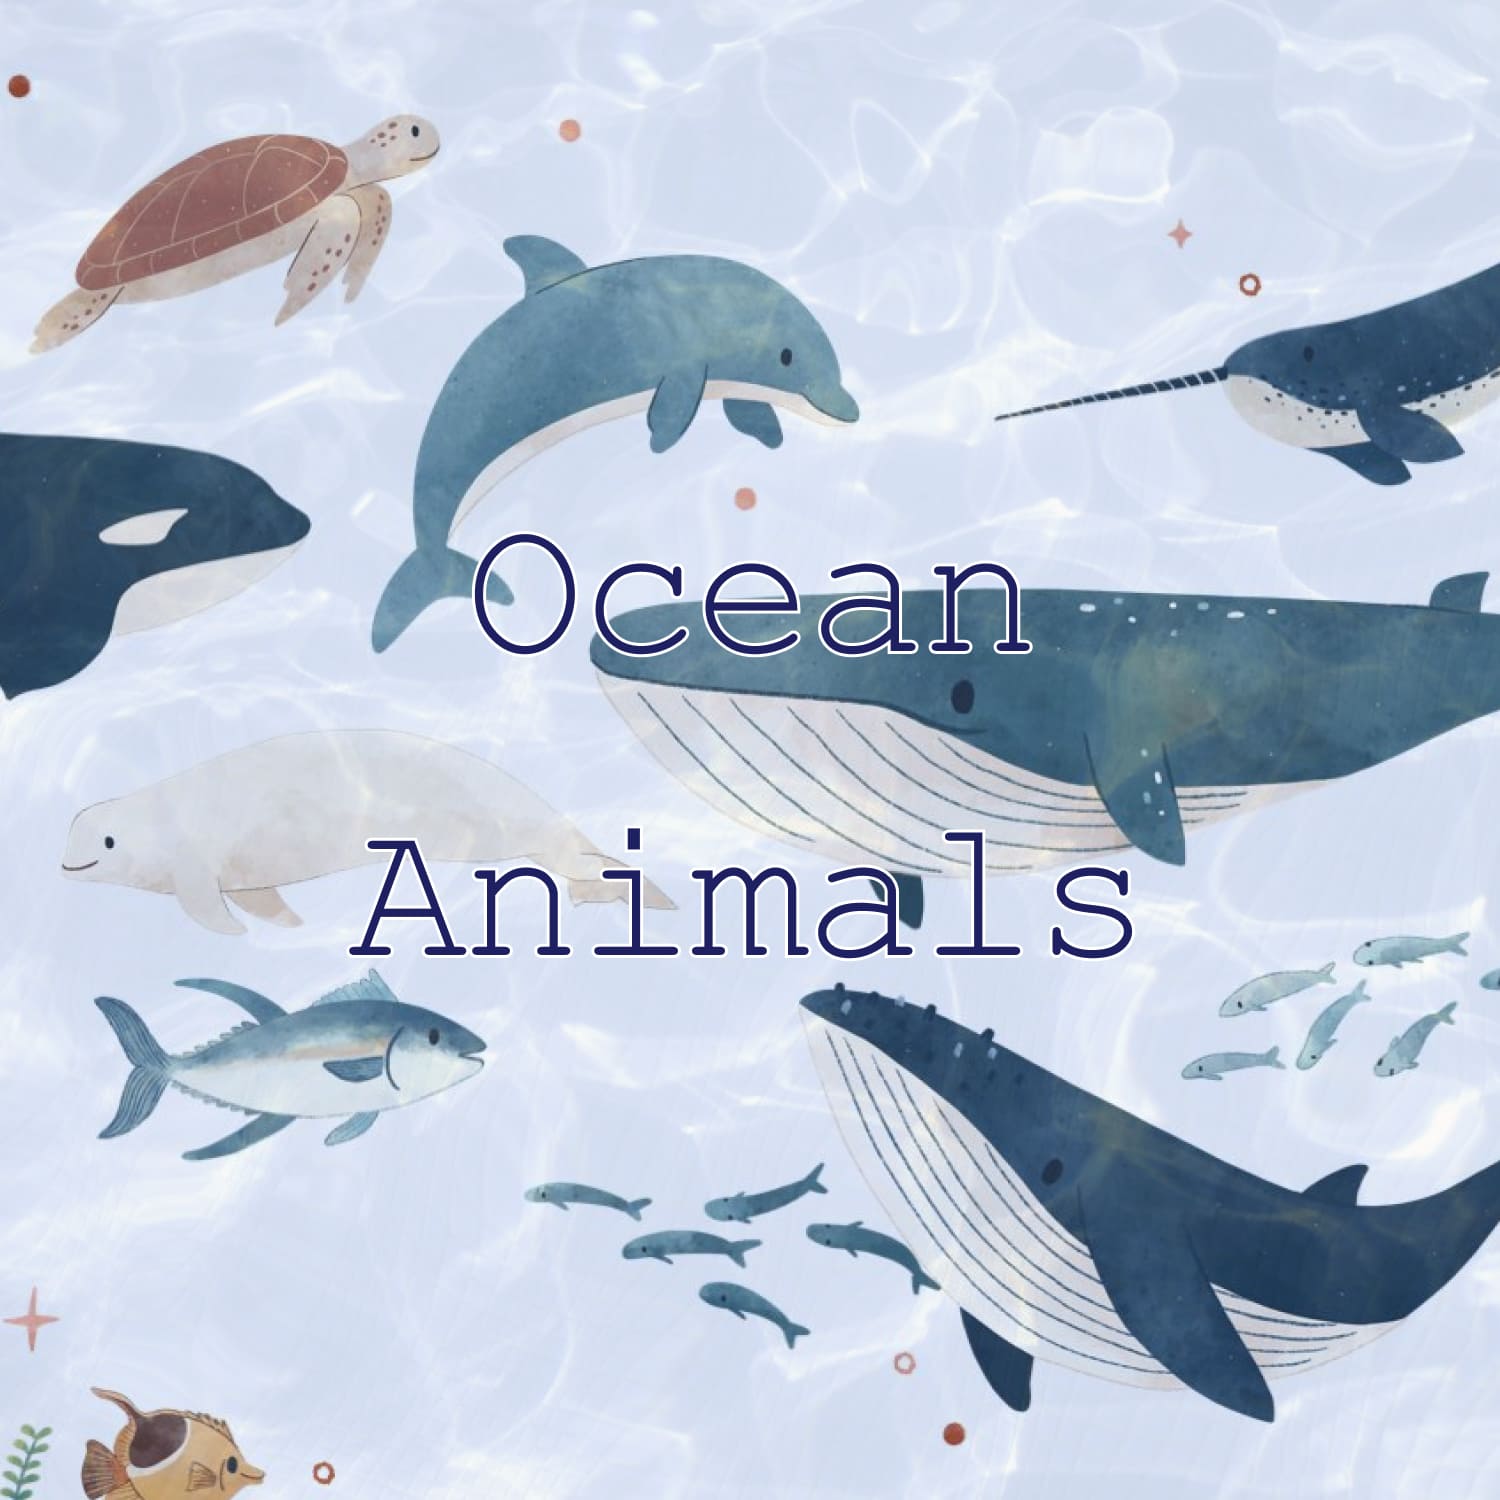 Ocean Animals image preview.